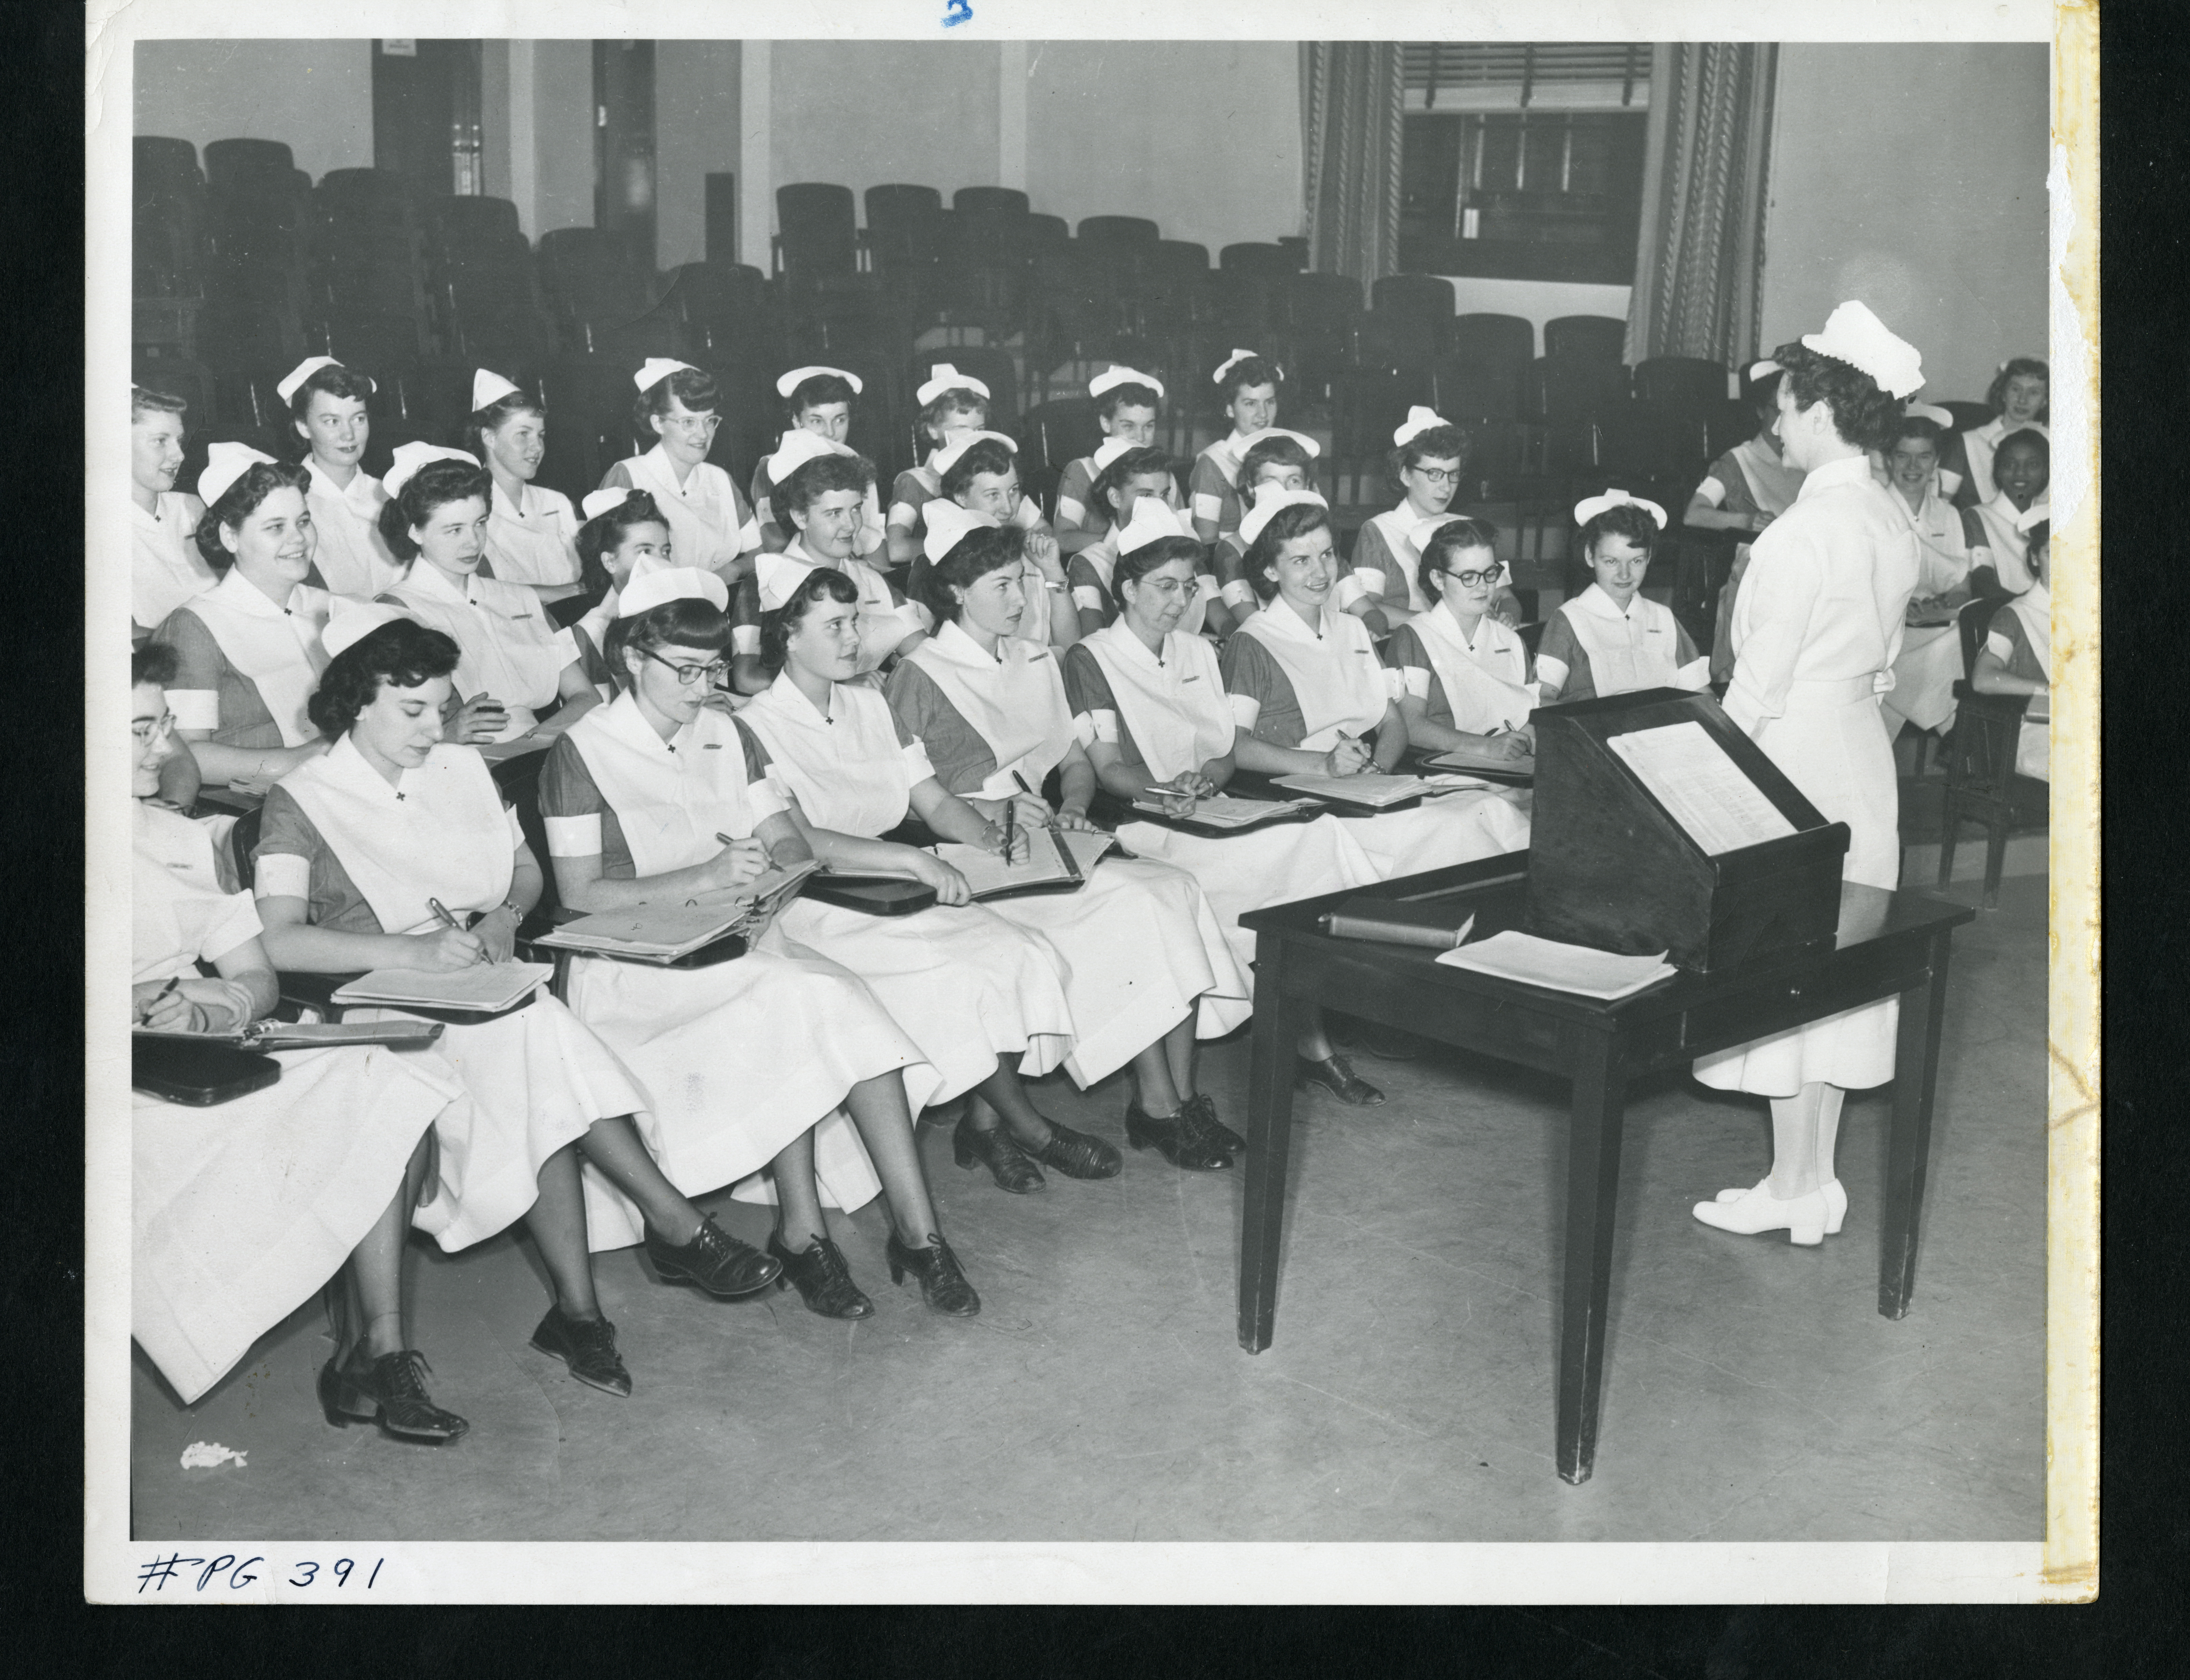 A black and white image of a group of women in nurse uniforms seated in a lecture hall. Another woman in a nursing uniform stands in front of them next to a lectern them.